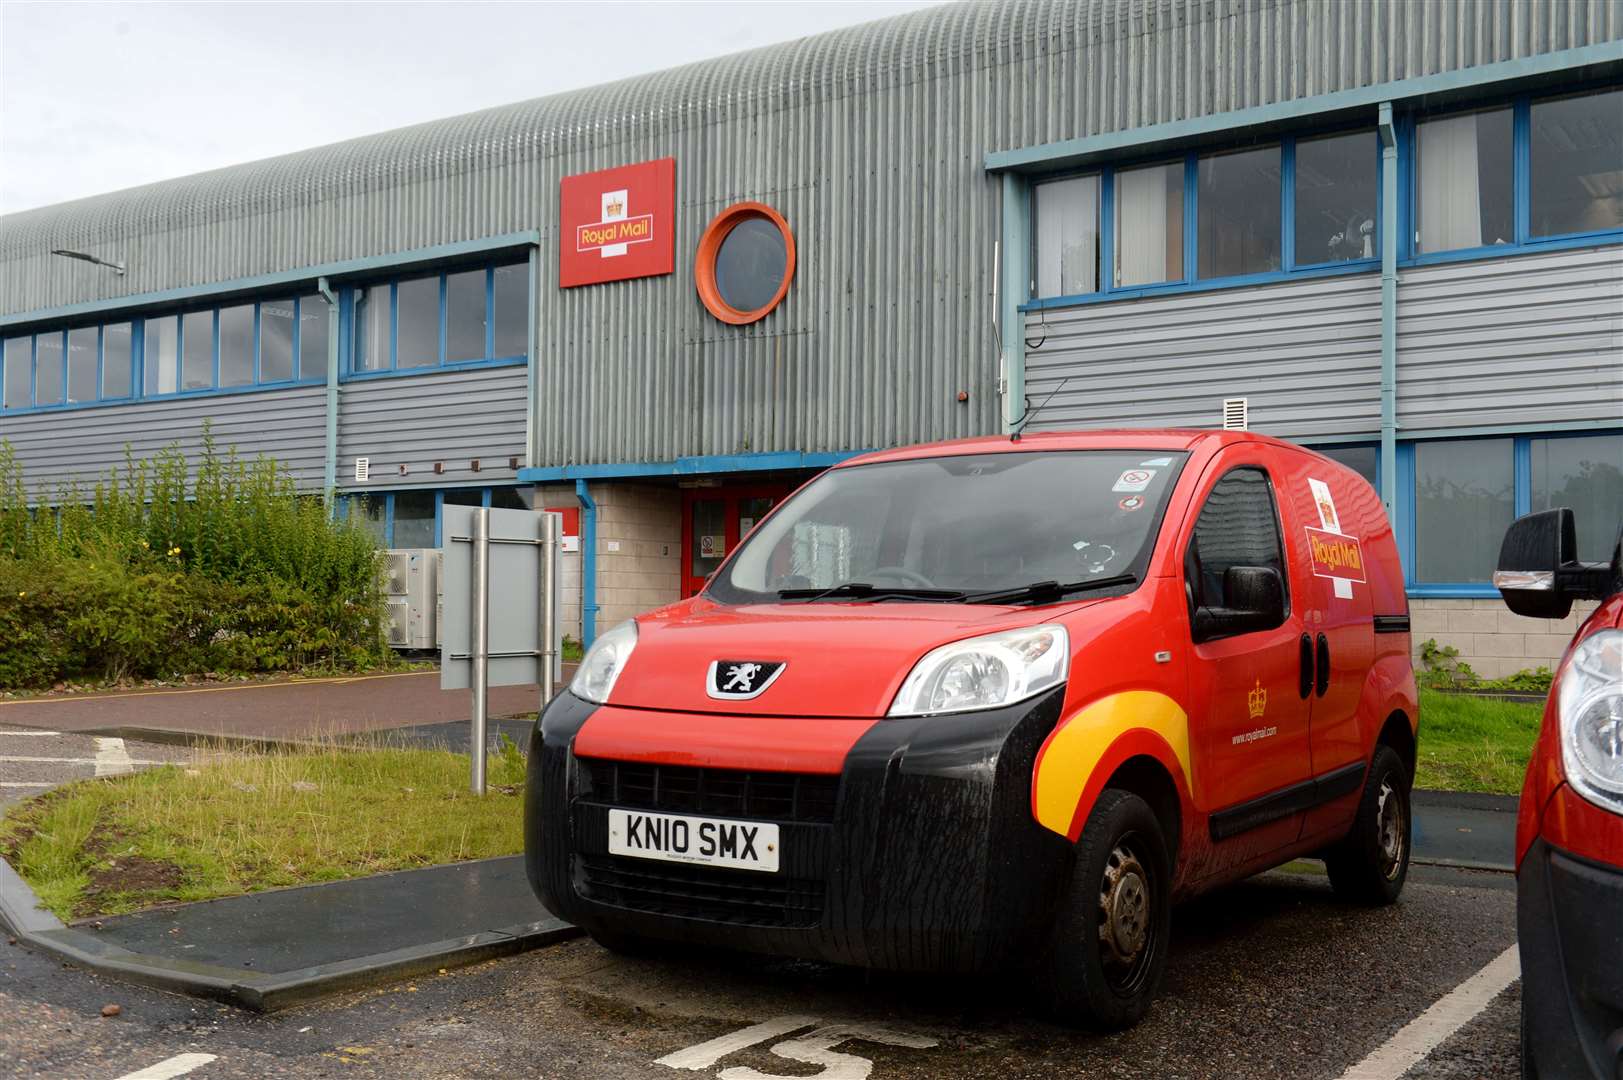 The Royal Mail centre in Inverness. Picture: James MacKenzie.